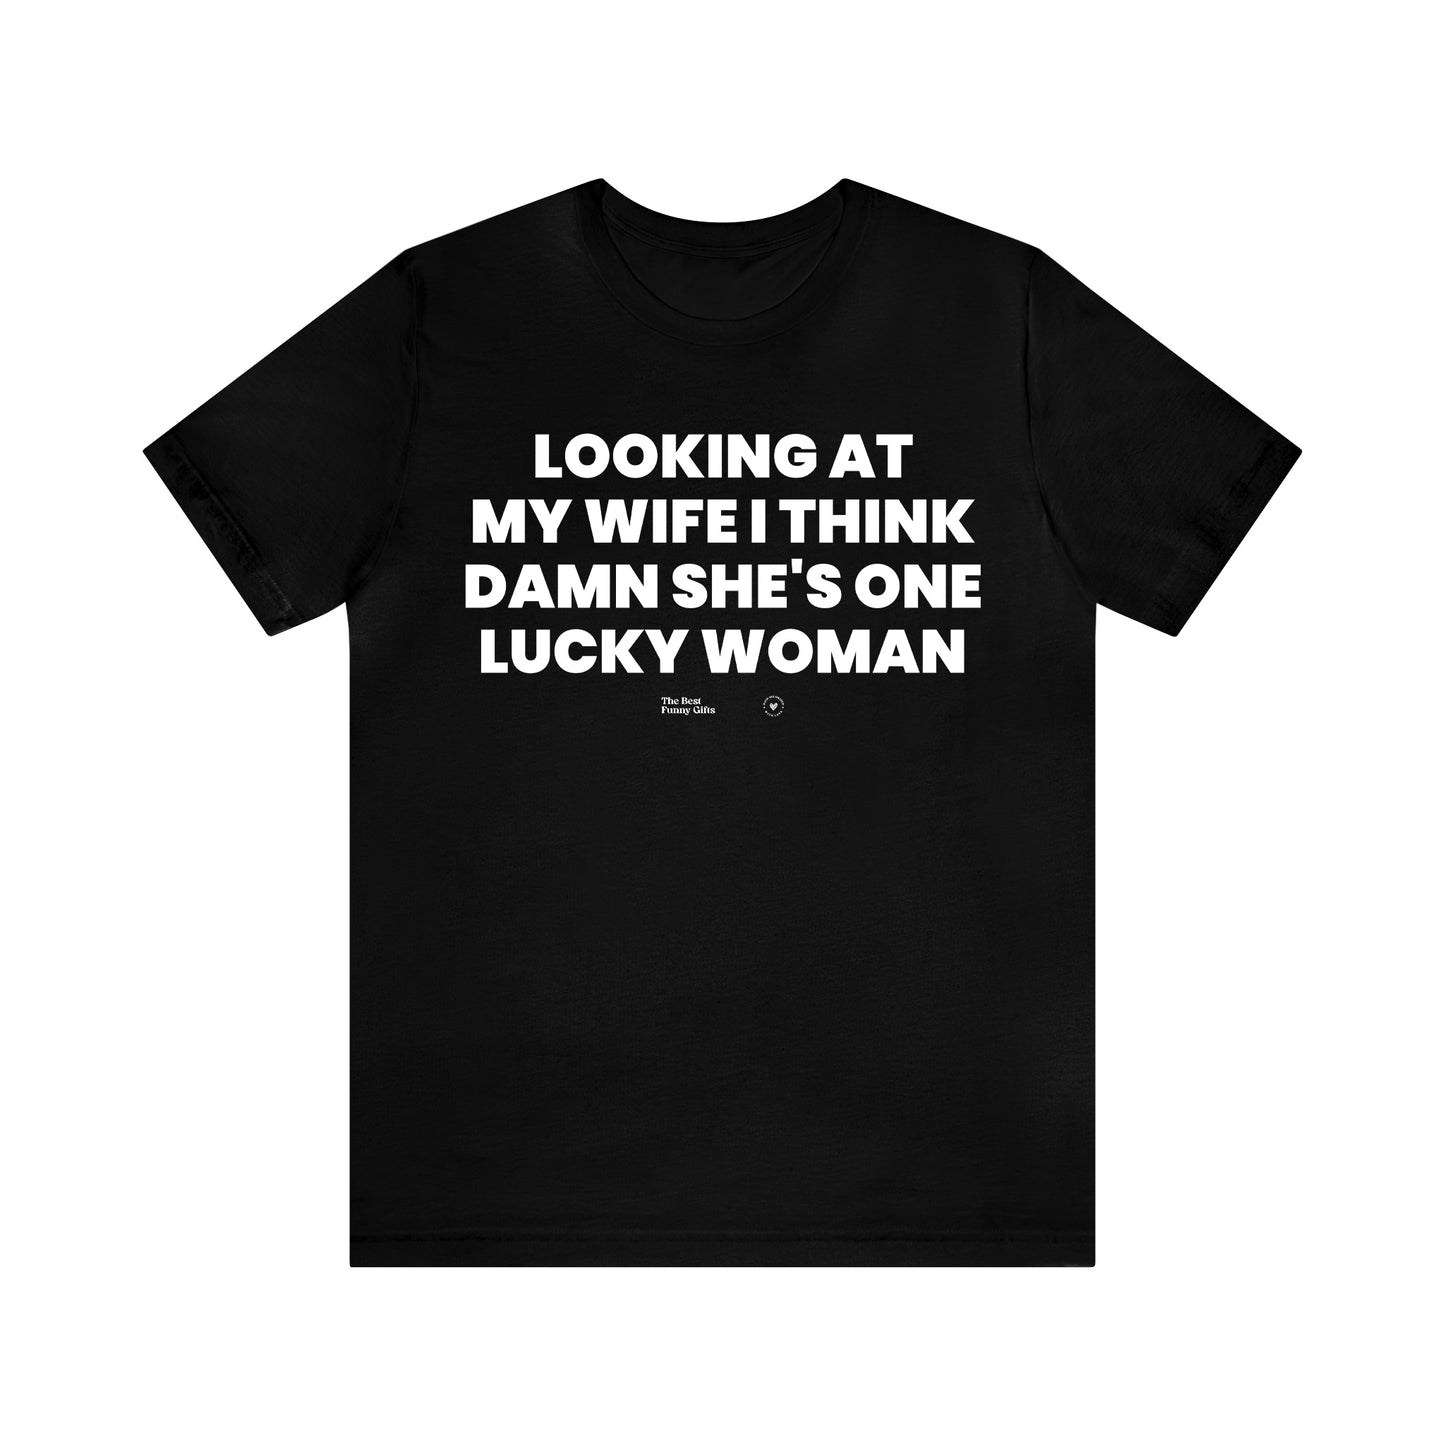 Mens T Shirts - Looking at My Wife I Think Damn She's One Lucky Woman - Funny Men T Shirts